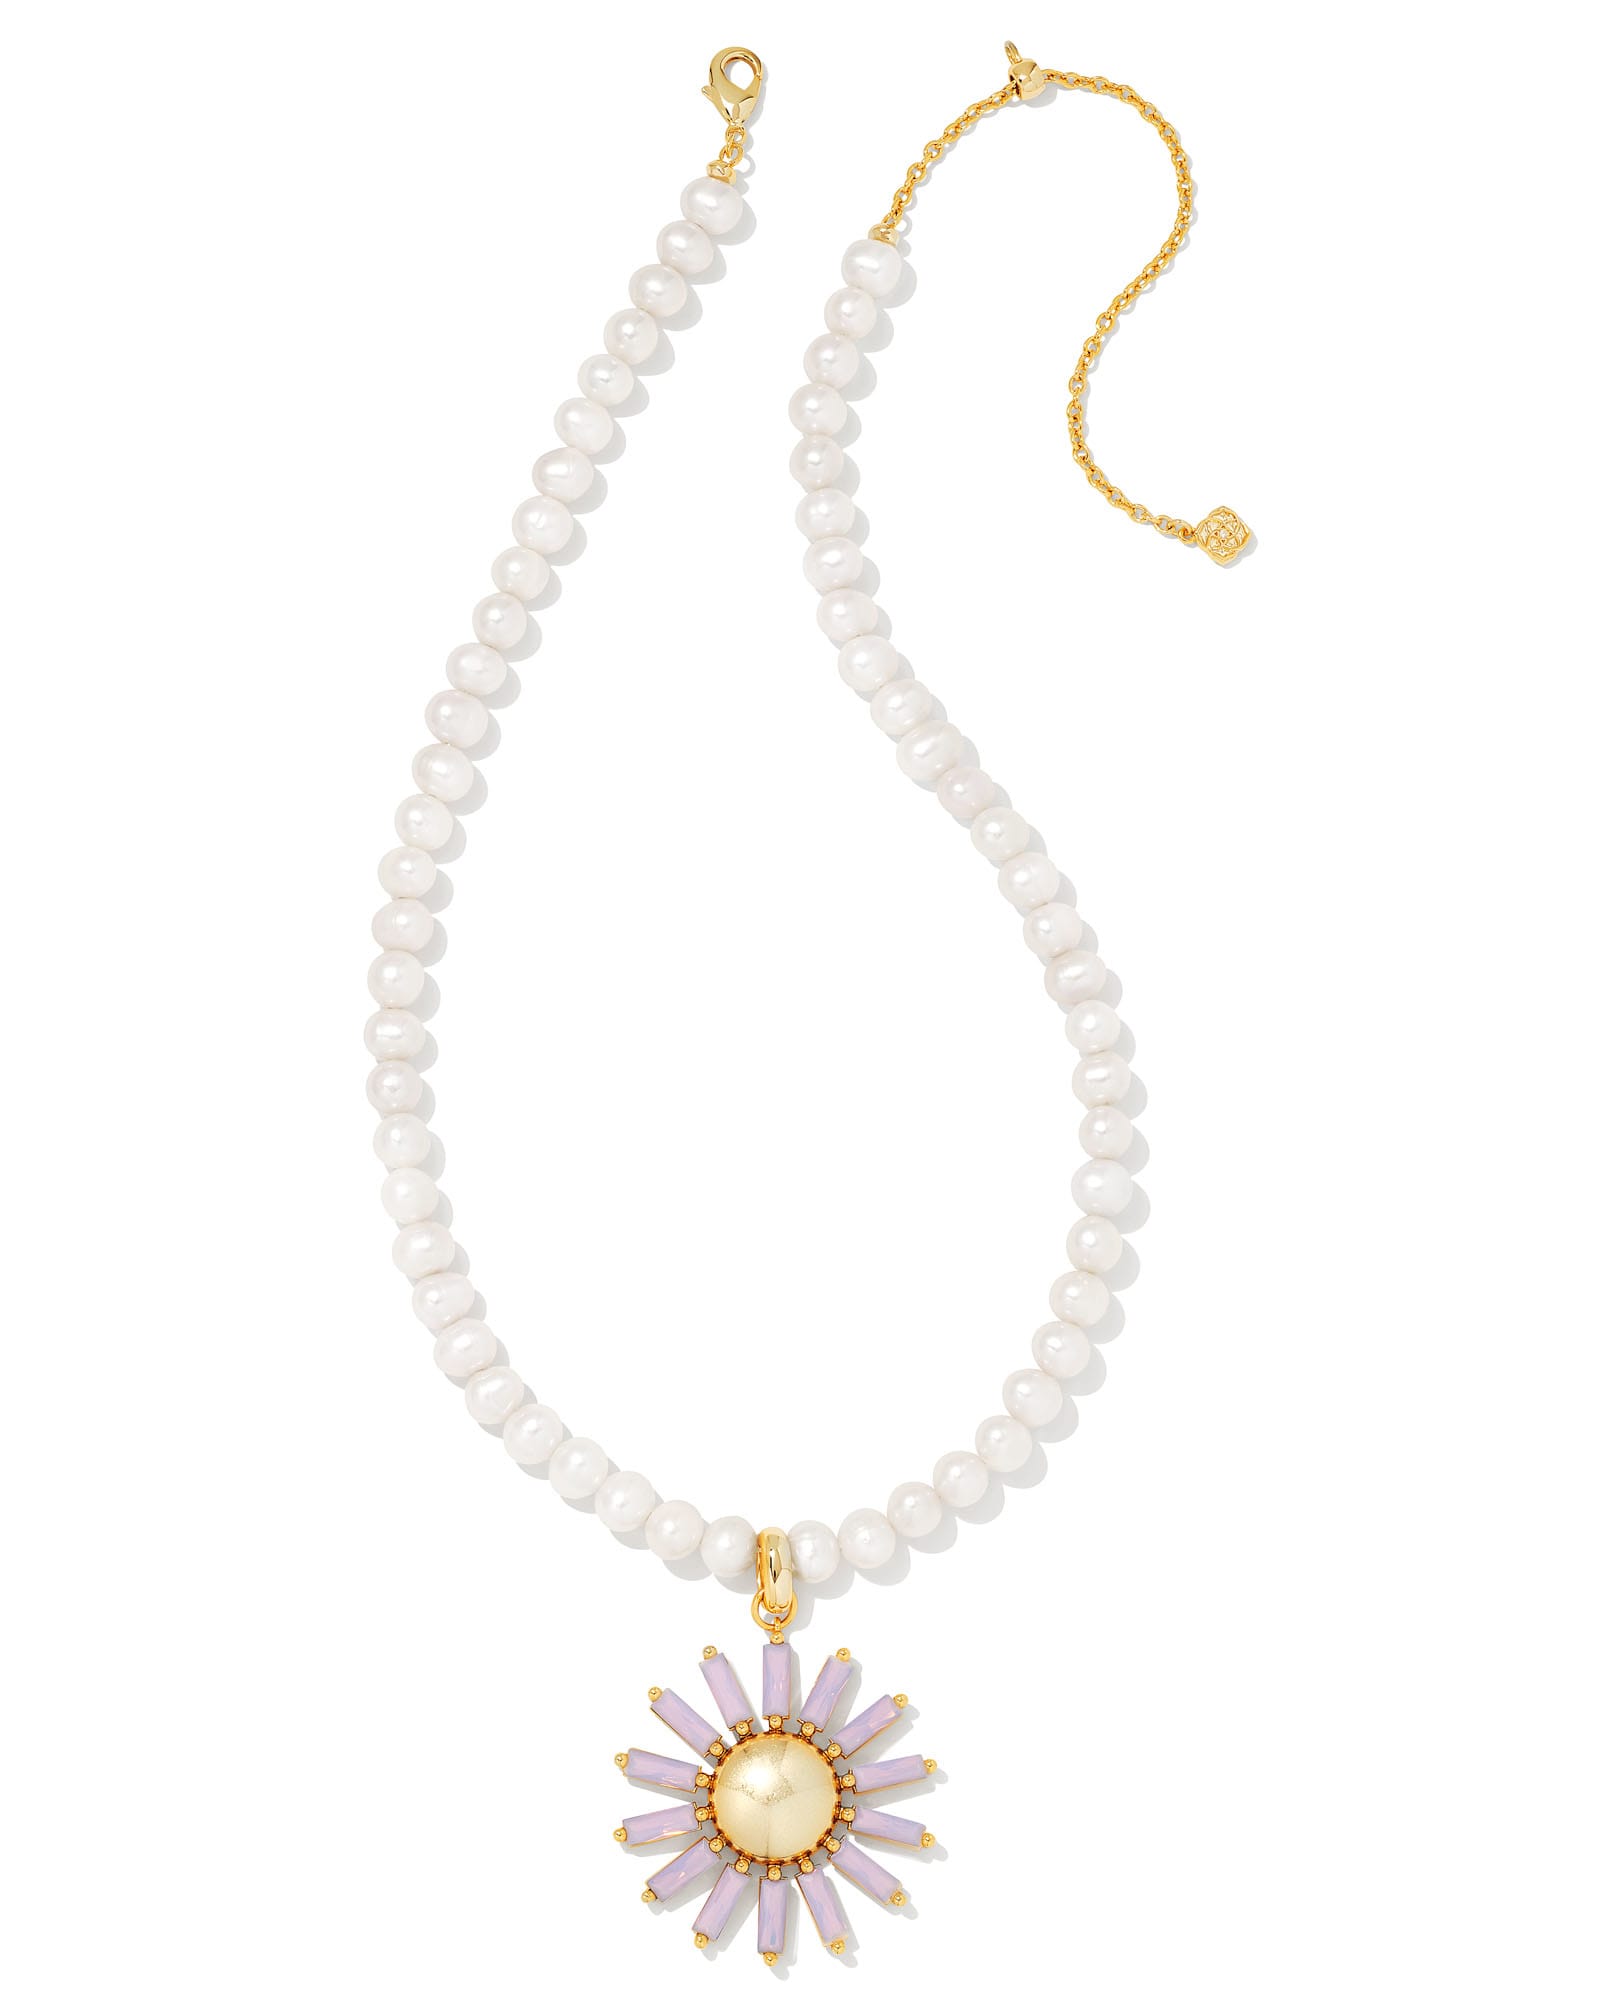 Kendra Scott Madison Daisy Convertible Gold Pearl Statement Necklace in Pink Opal Crystal   Nano Crystal